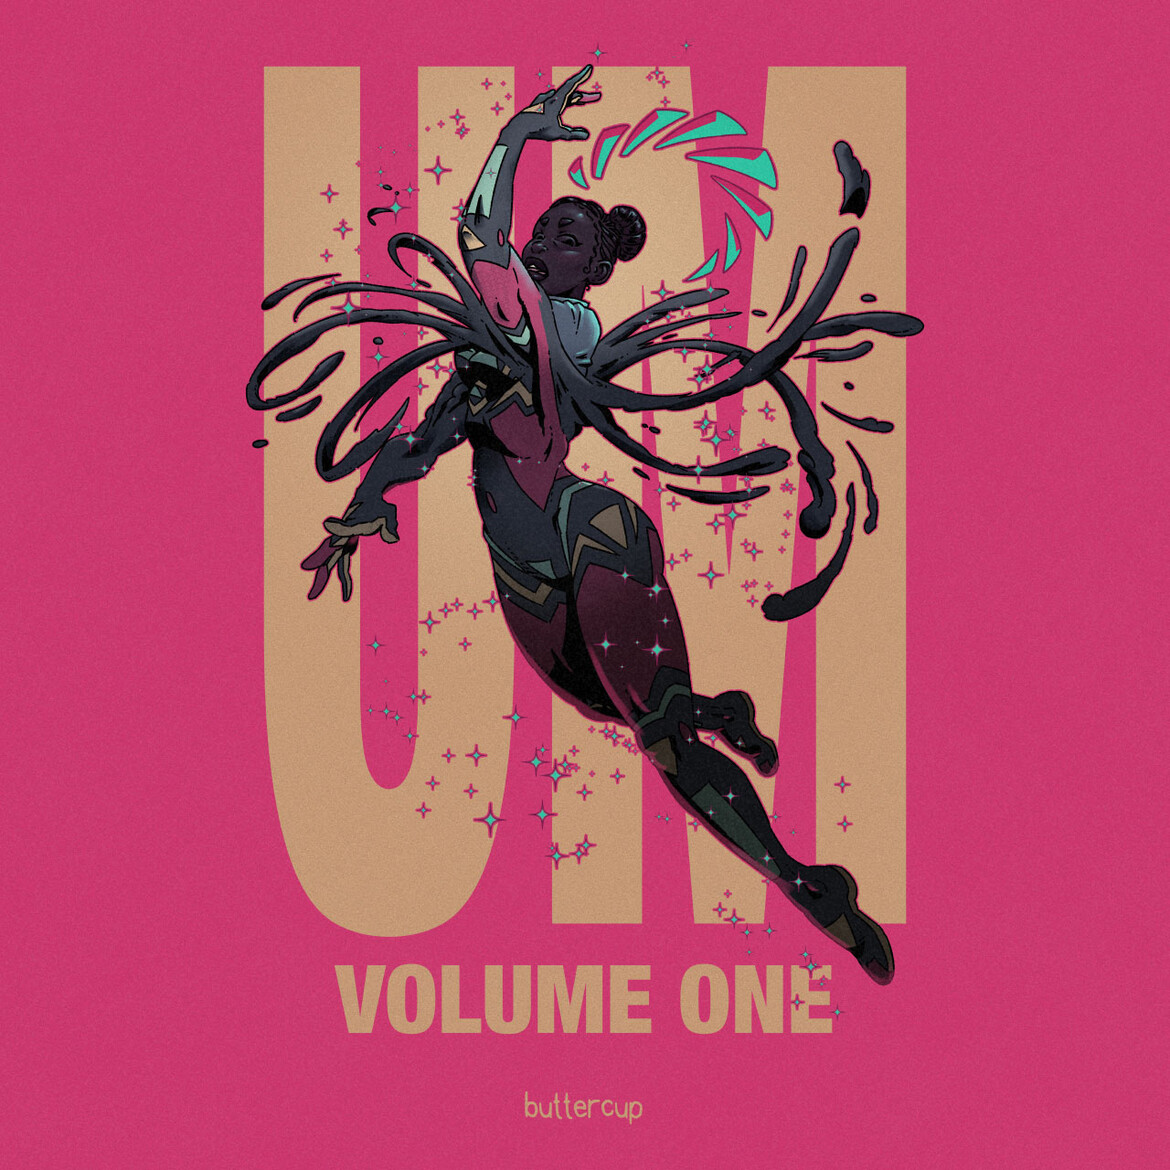 UM Volume One Cover, main character Eugenée striking a pose mid-flight, with magic swirling around them.